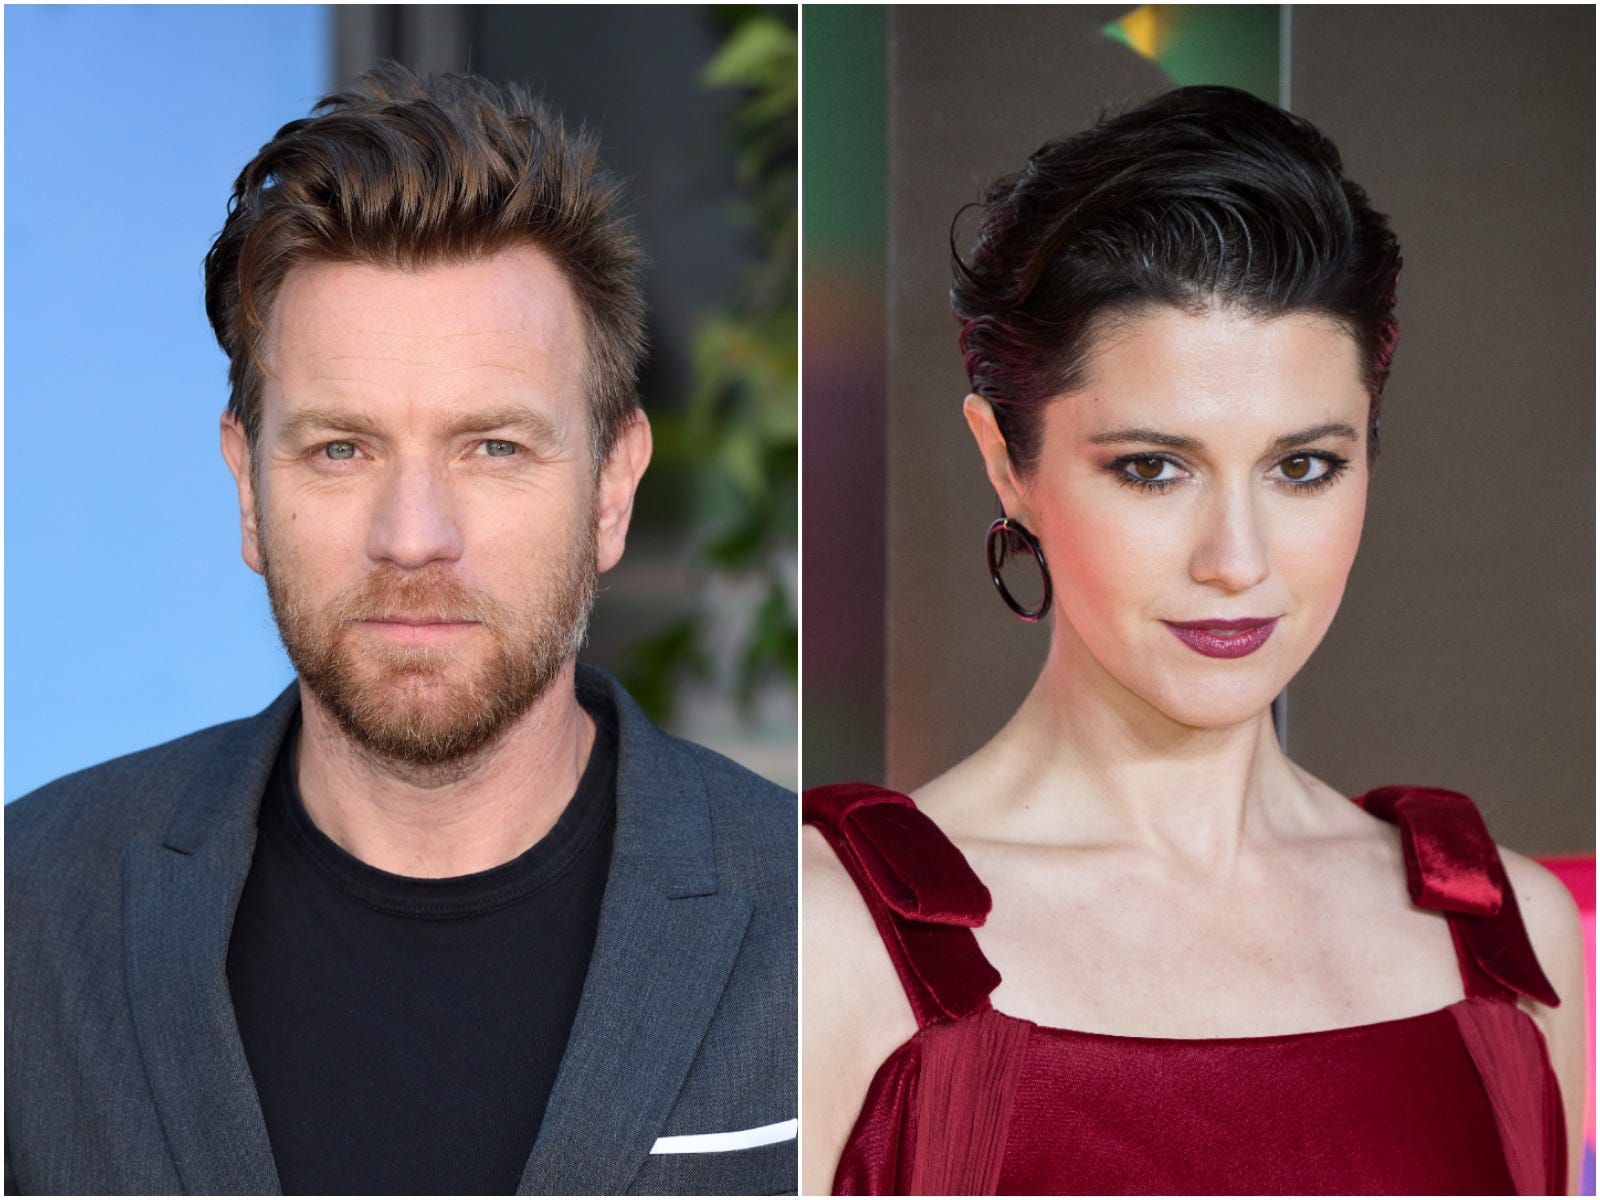 Collage image with Ewan McGregor on the left and Mary Elizabeth Winstead on the right